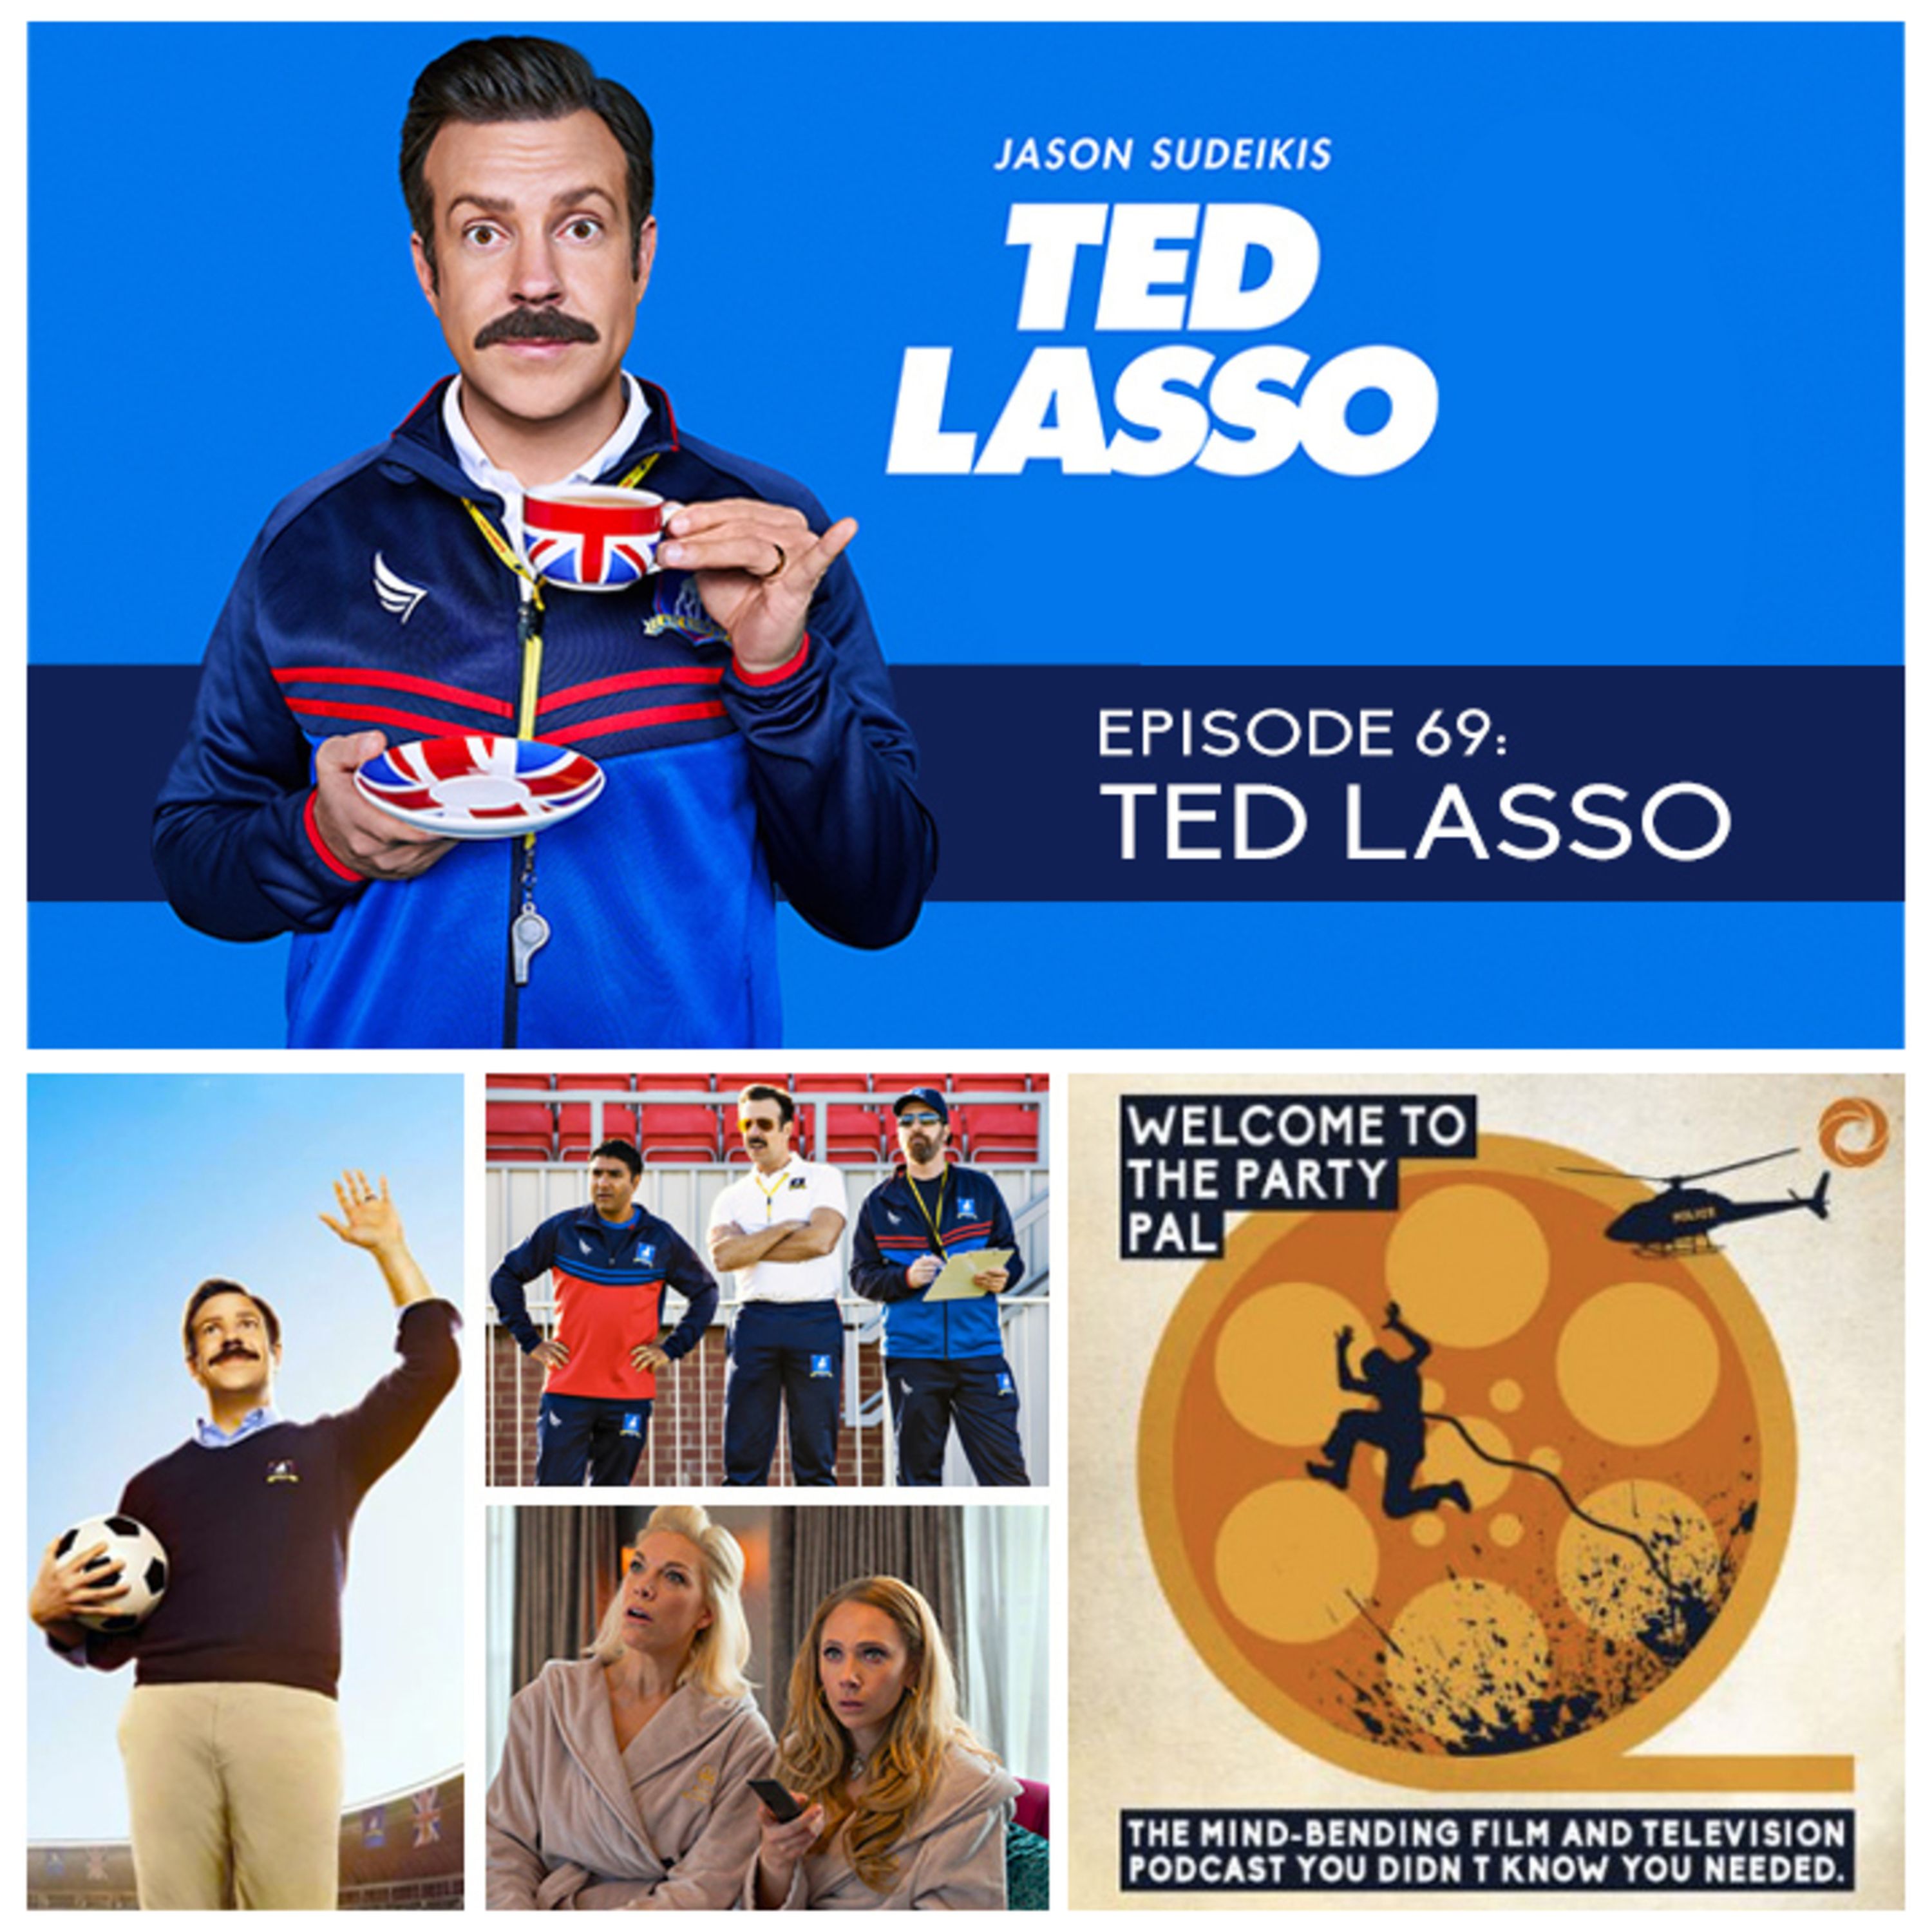 Episode 69: Ted Lasso